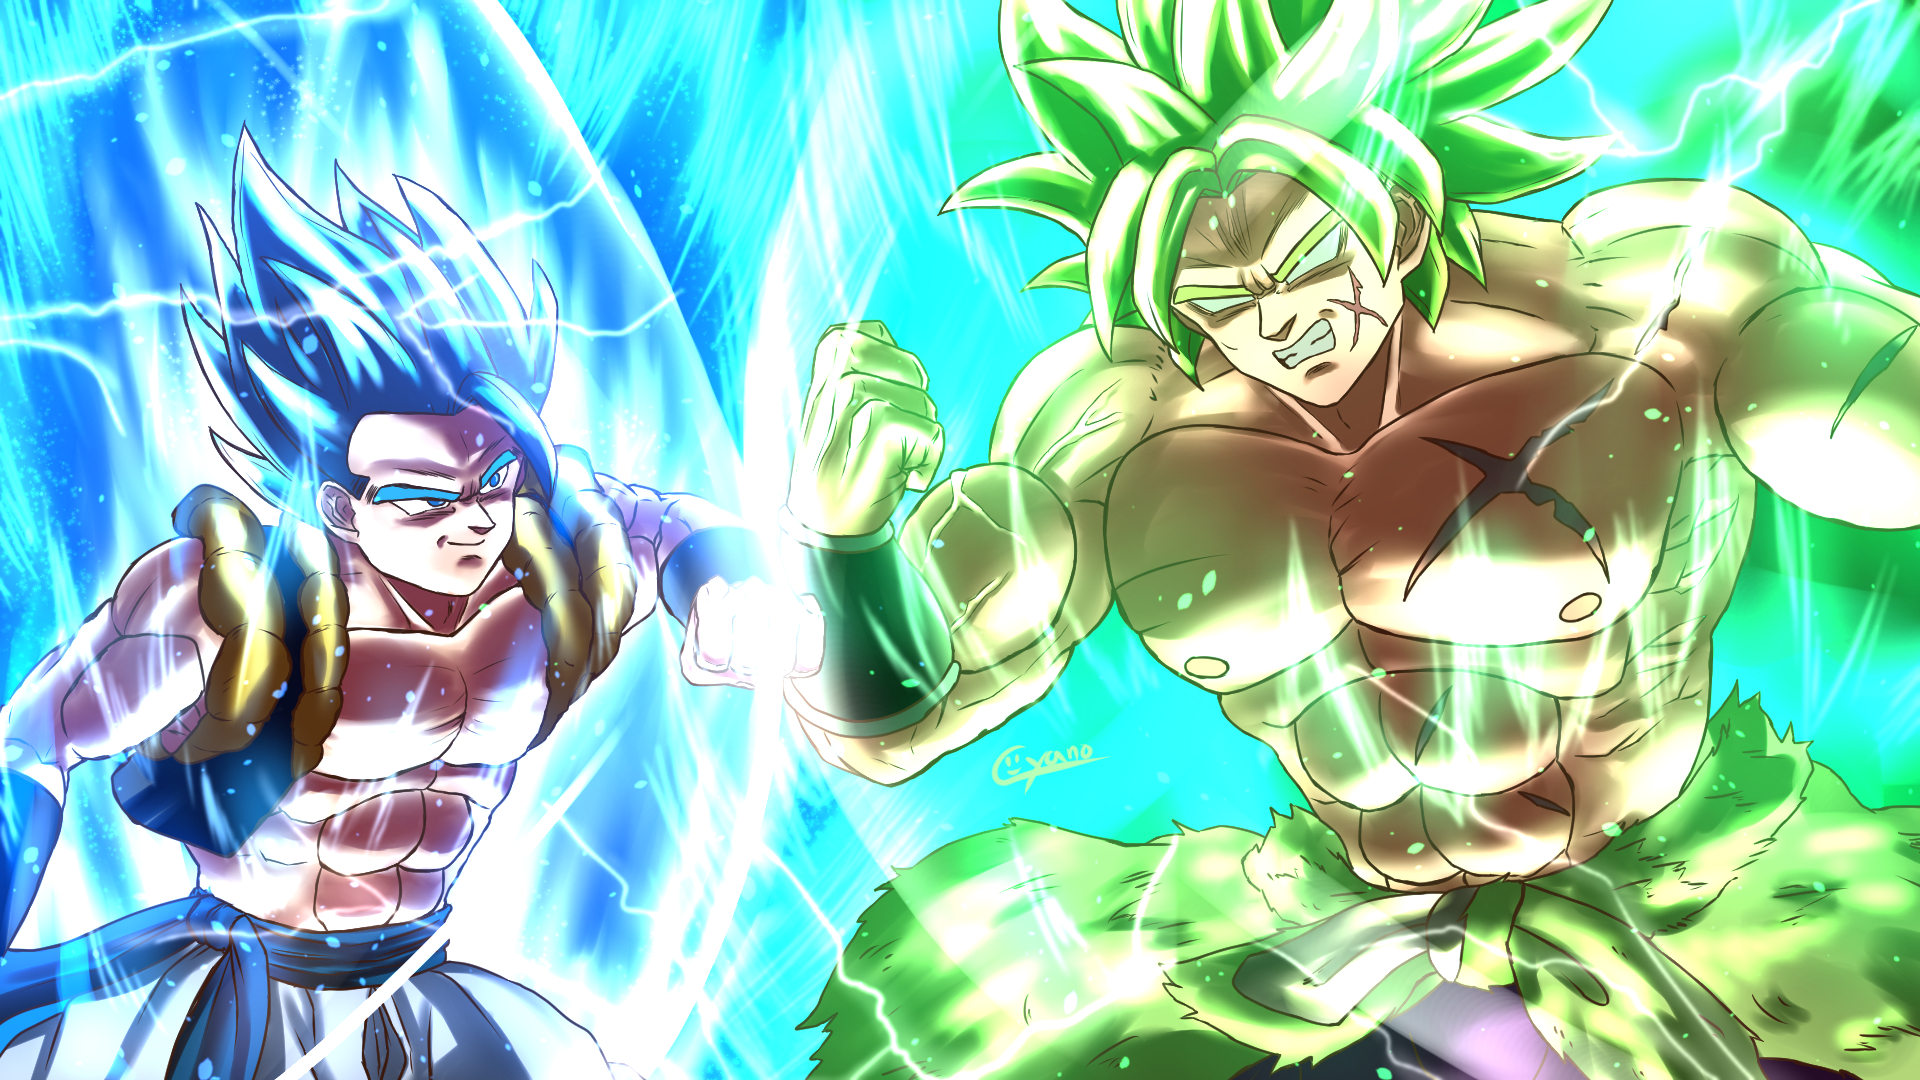 Dragon Ball Super: Broly HD Wallpapers, Pictures, Images